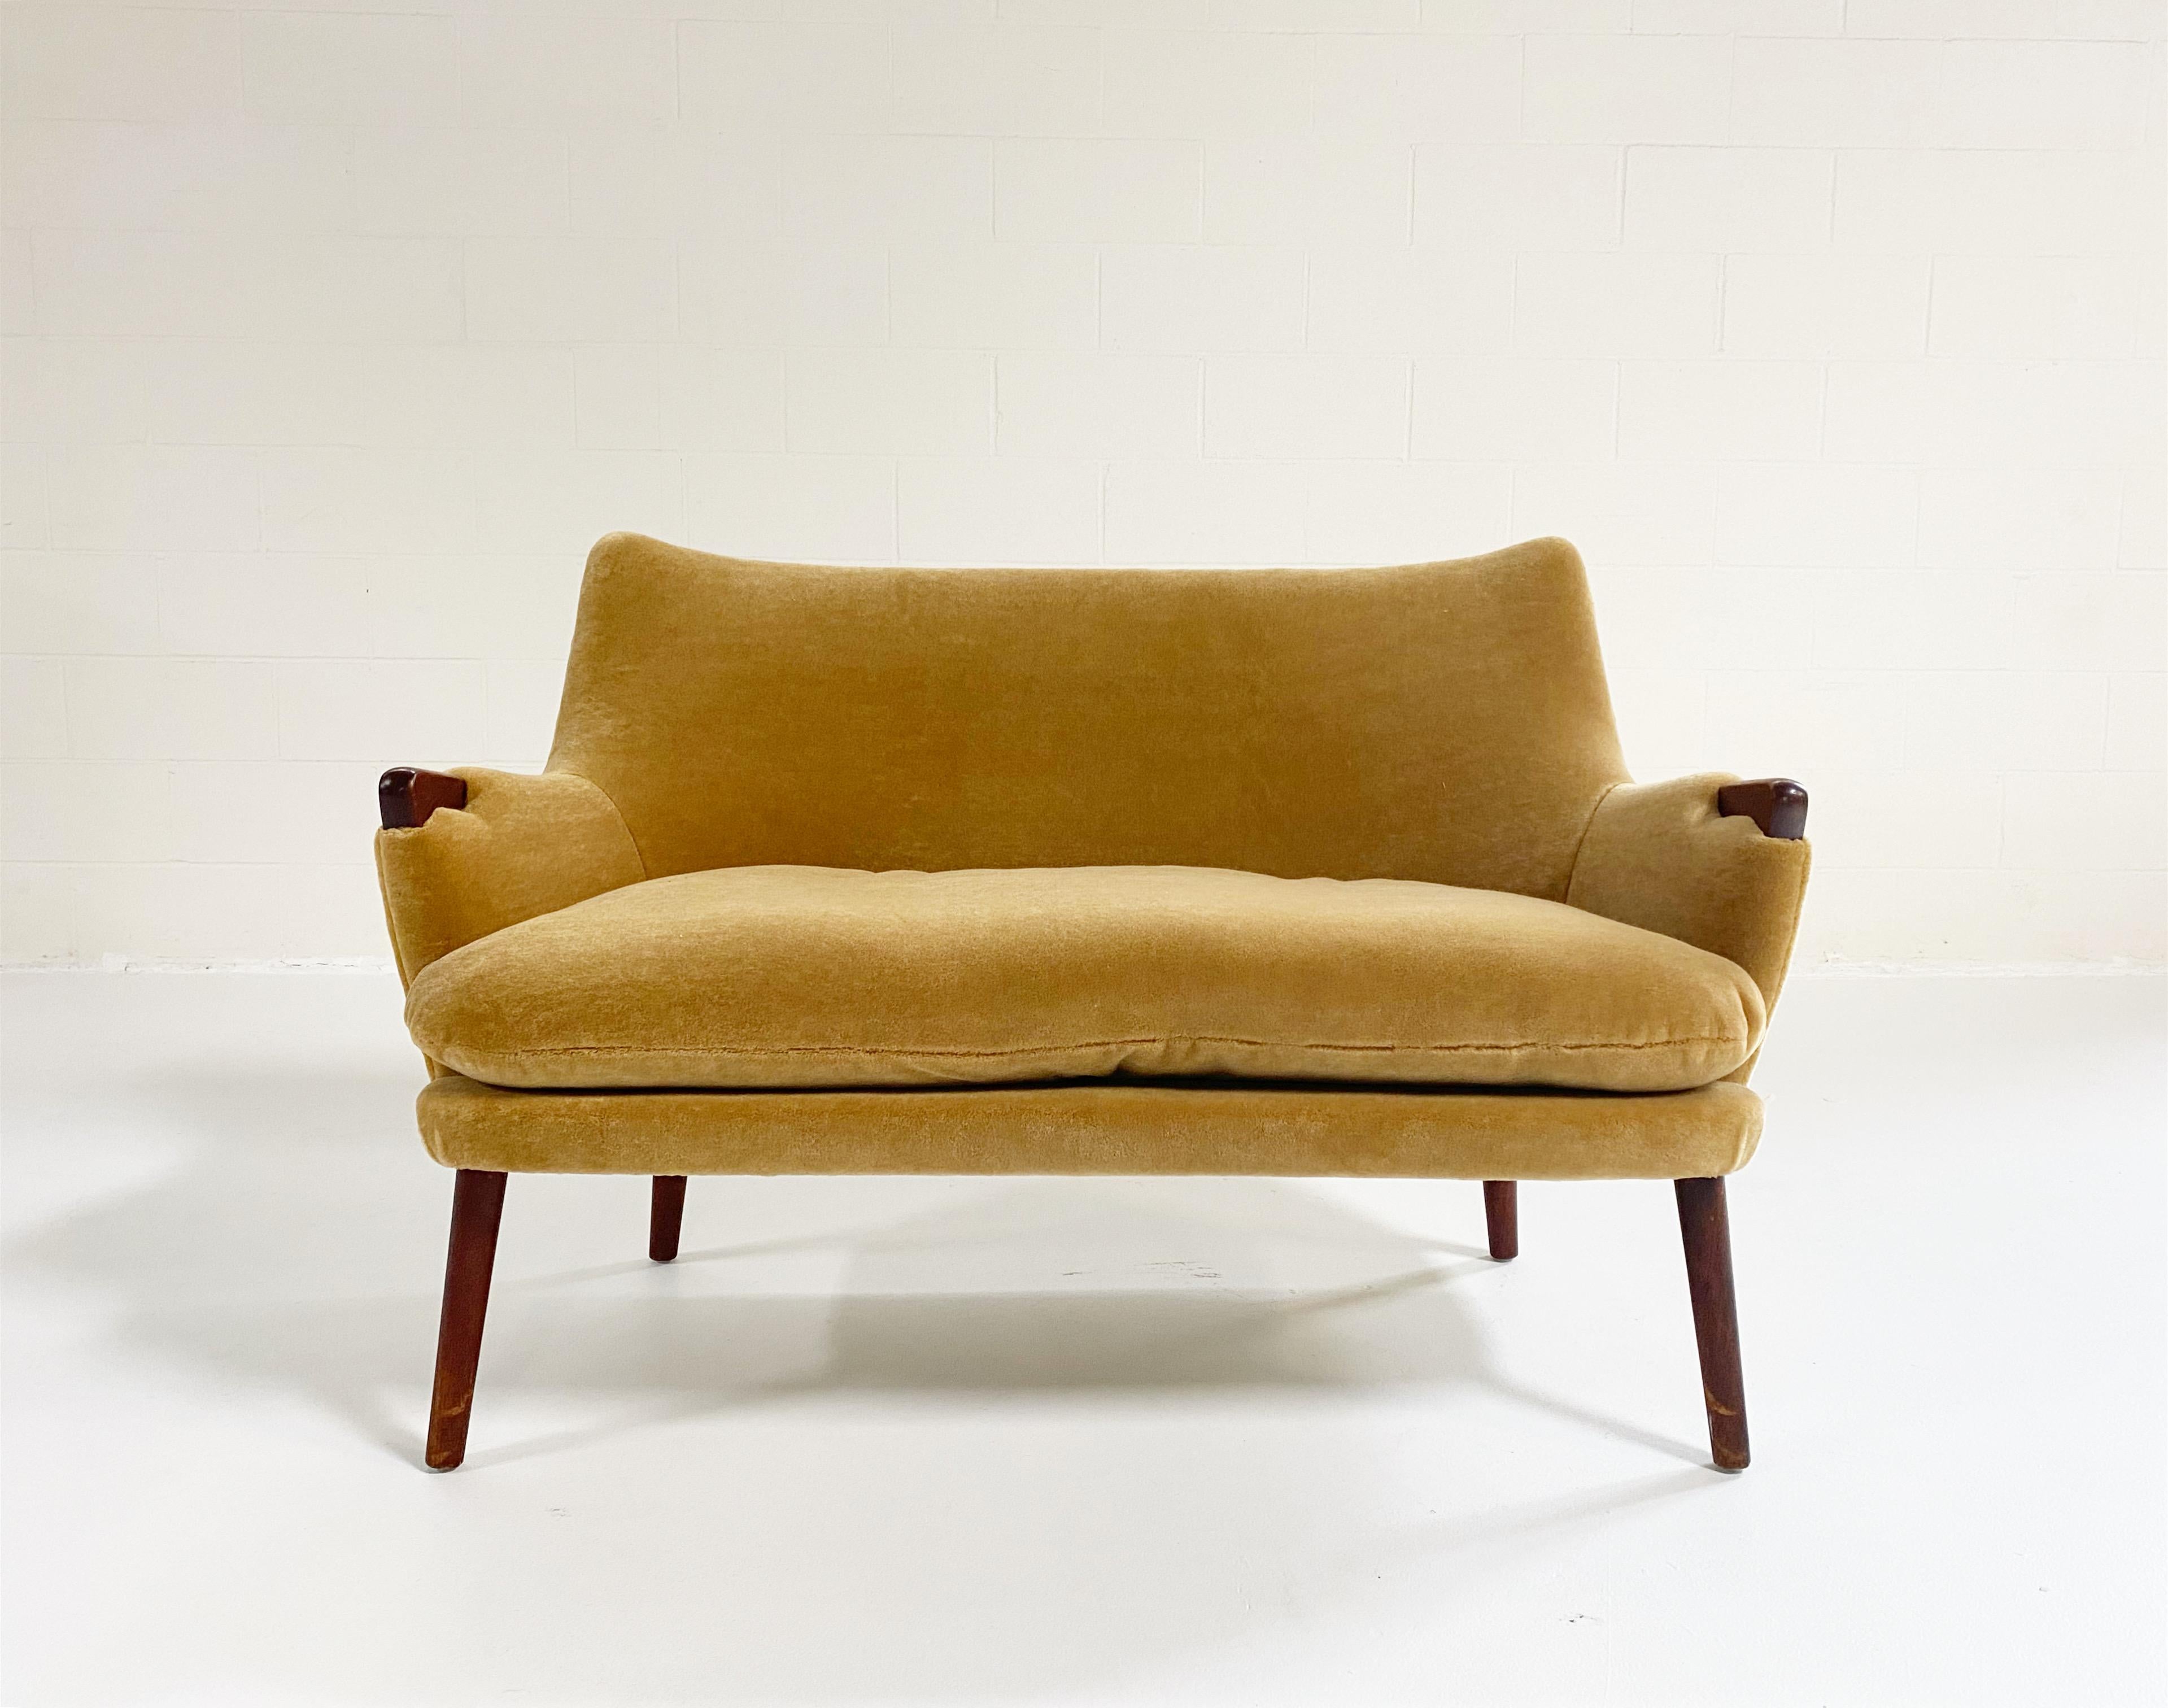 Hans Wegner designed the CH71 lounge chair and CH72 sofa in 1952, drawing on expertise in cabinetmaking and upholstery. The result is a finely crafted, fluid design that appears as striking today as it did over half a century ago - from the Carl